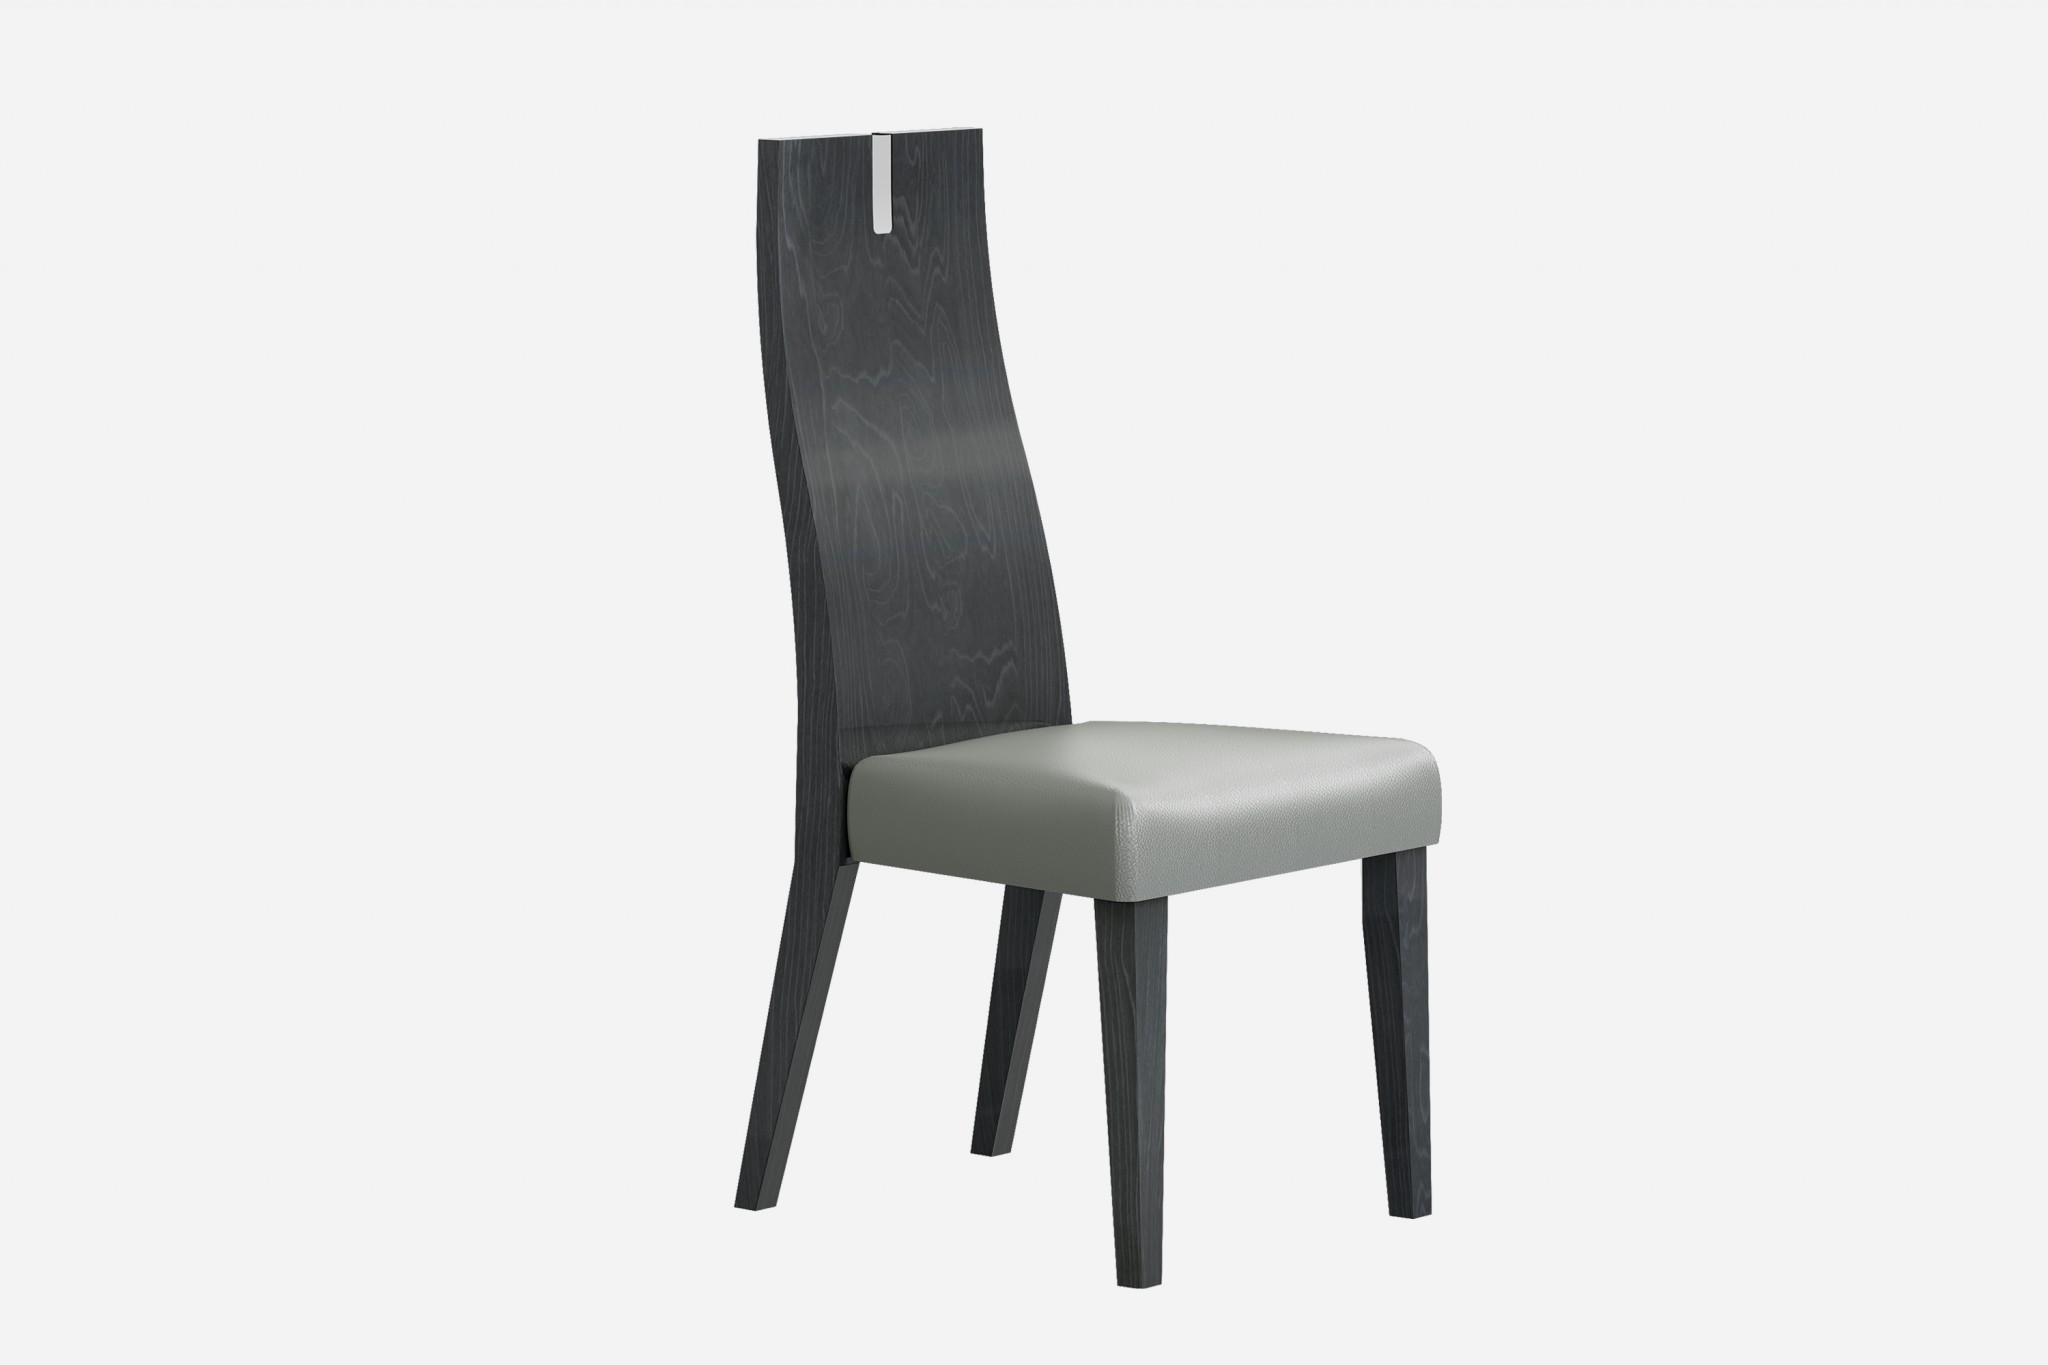 18" X 24" X 43" Chair Faux Leather Metal Dining Chair